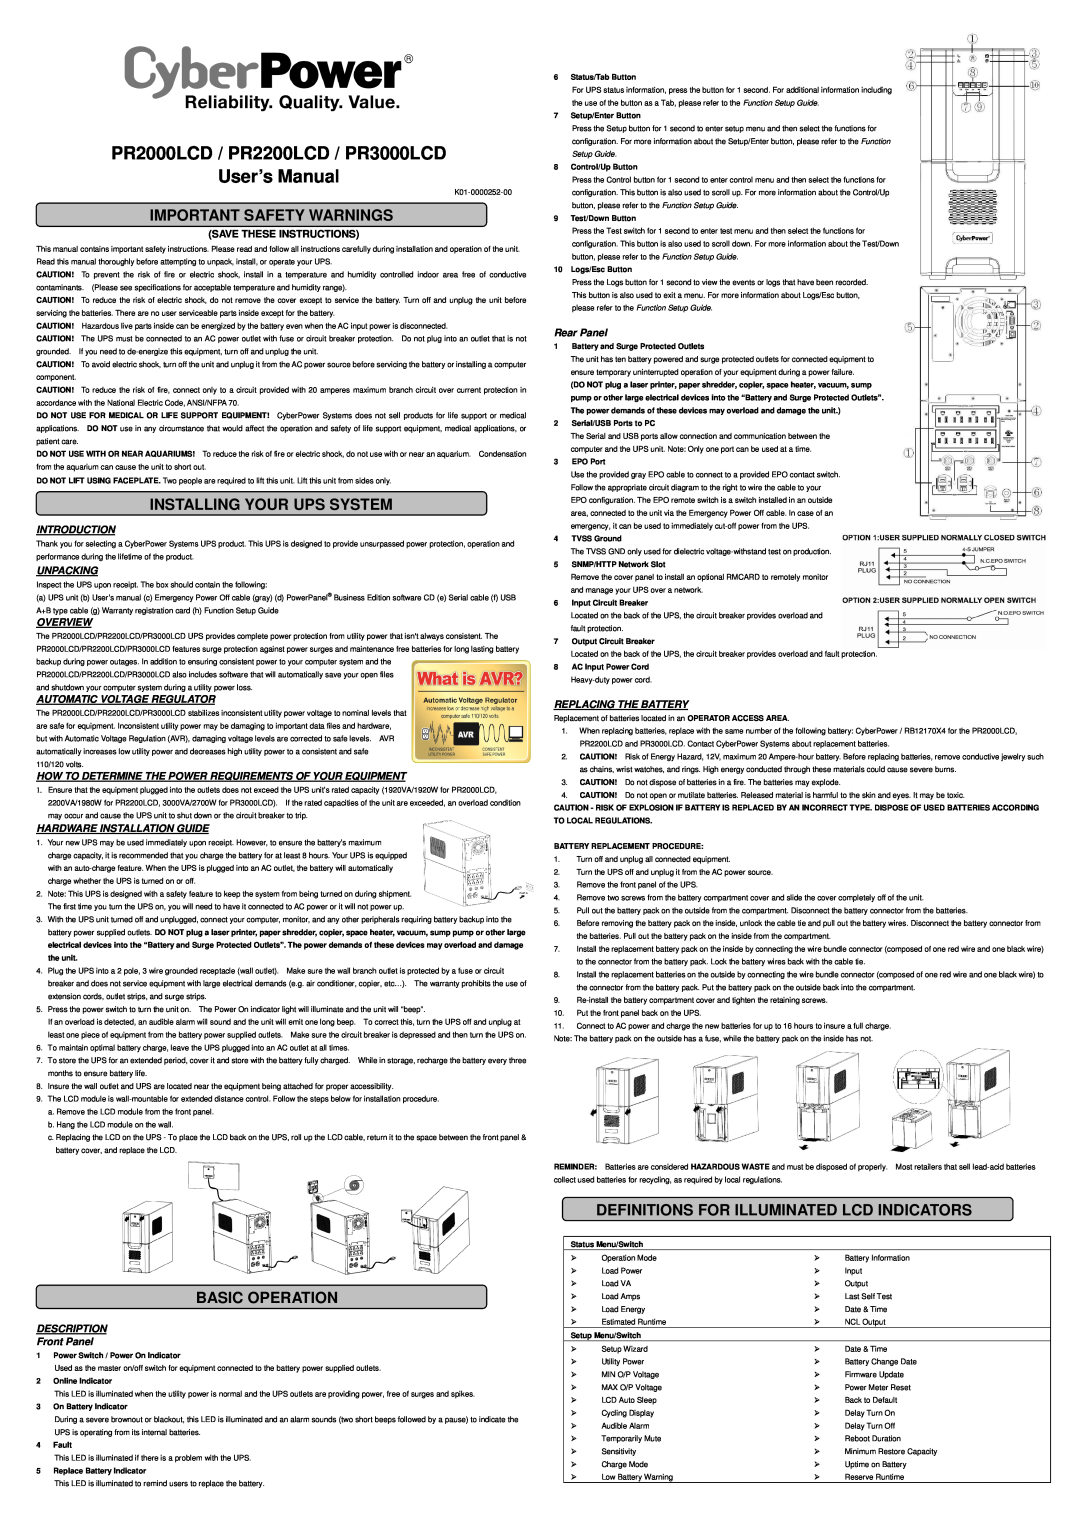 CyberPower PR2000LCD user manual Important Safety Warnings, Installing Your Ups System, Basic Operation, Introduction 